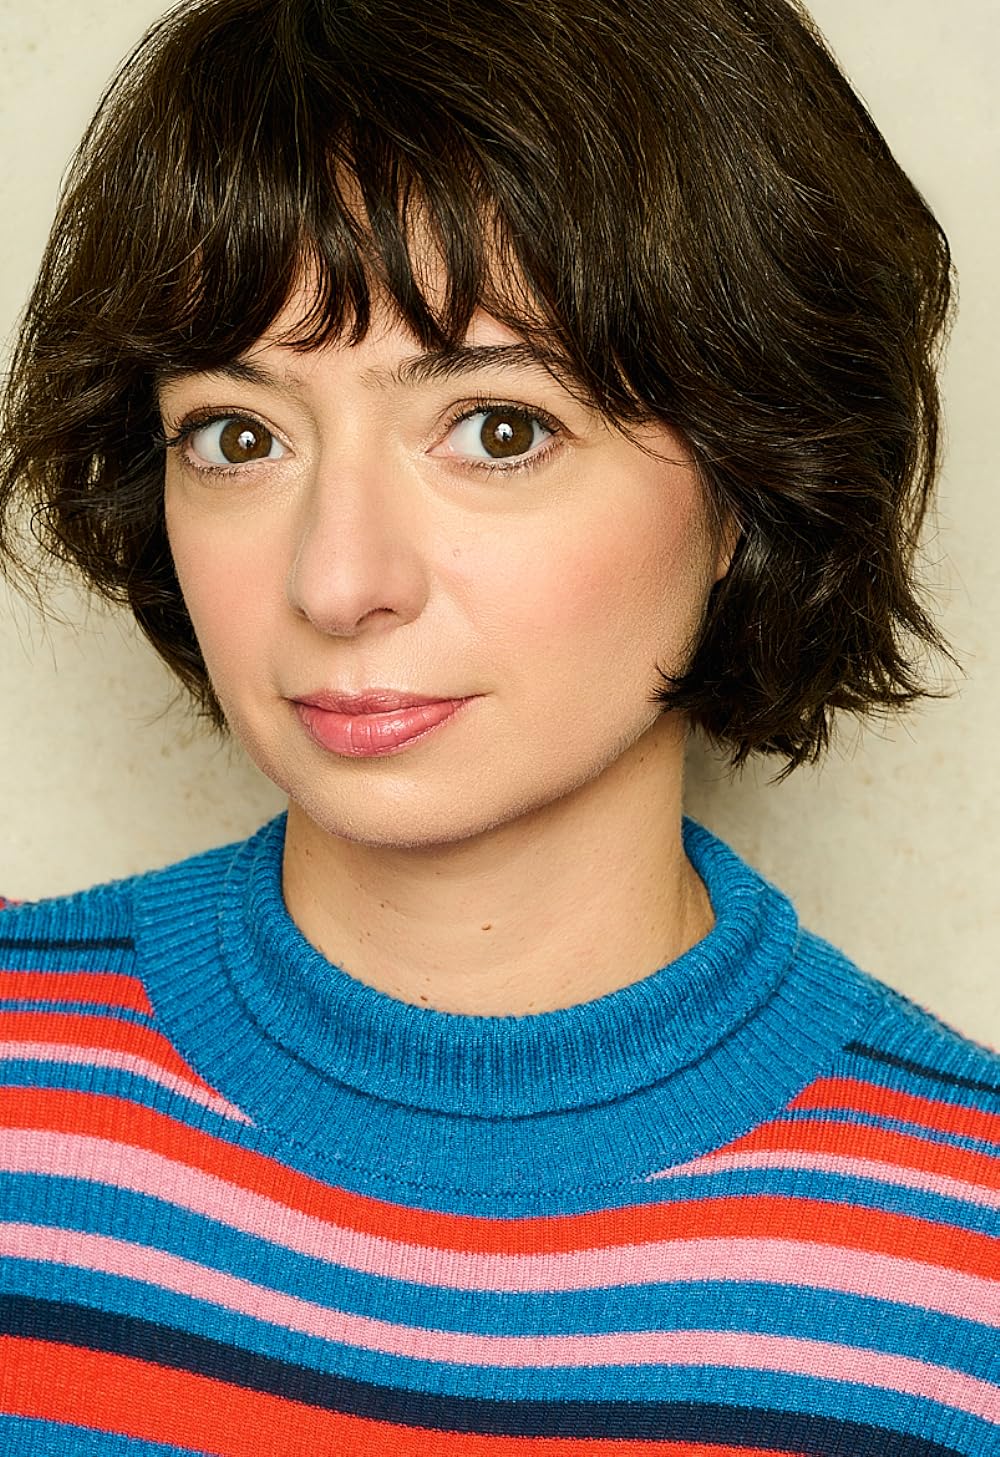 danielle woehler recommends Kate Micucci Hot